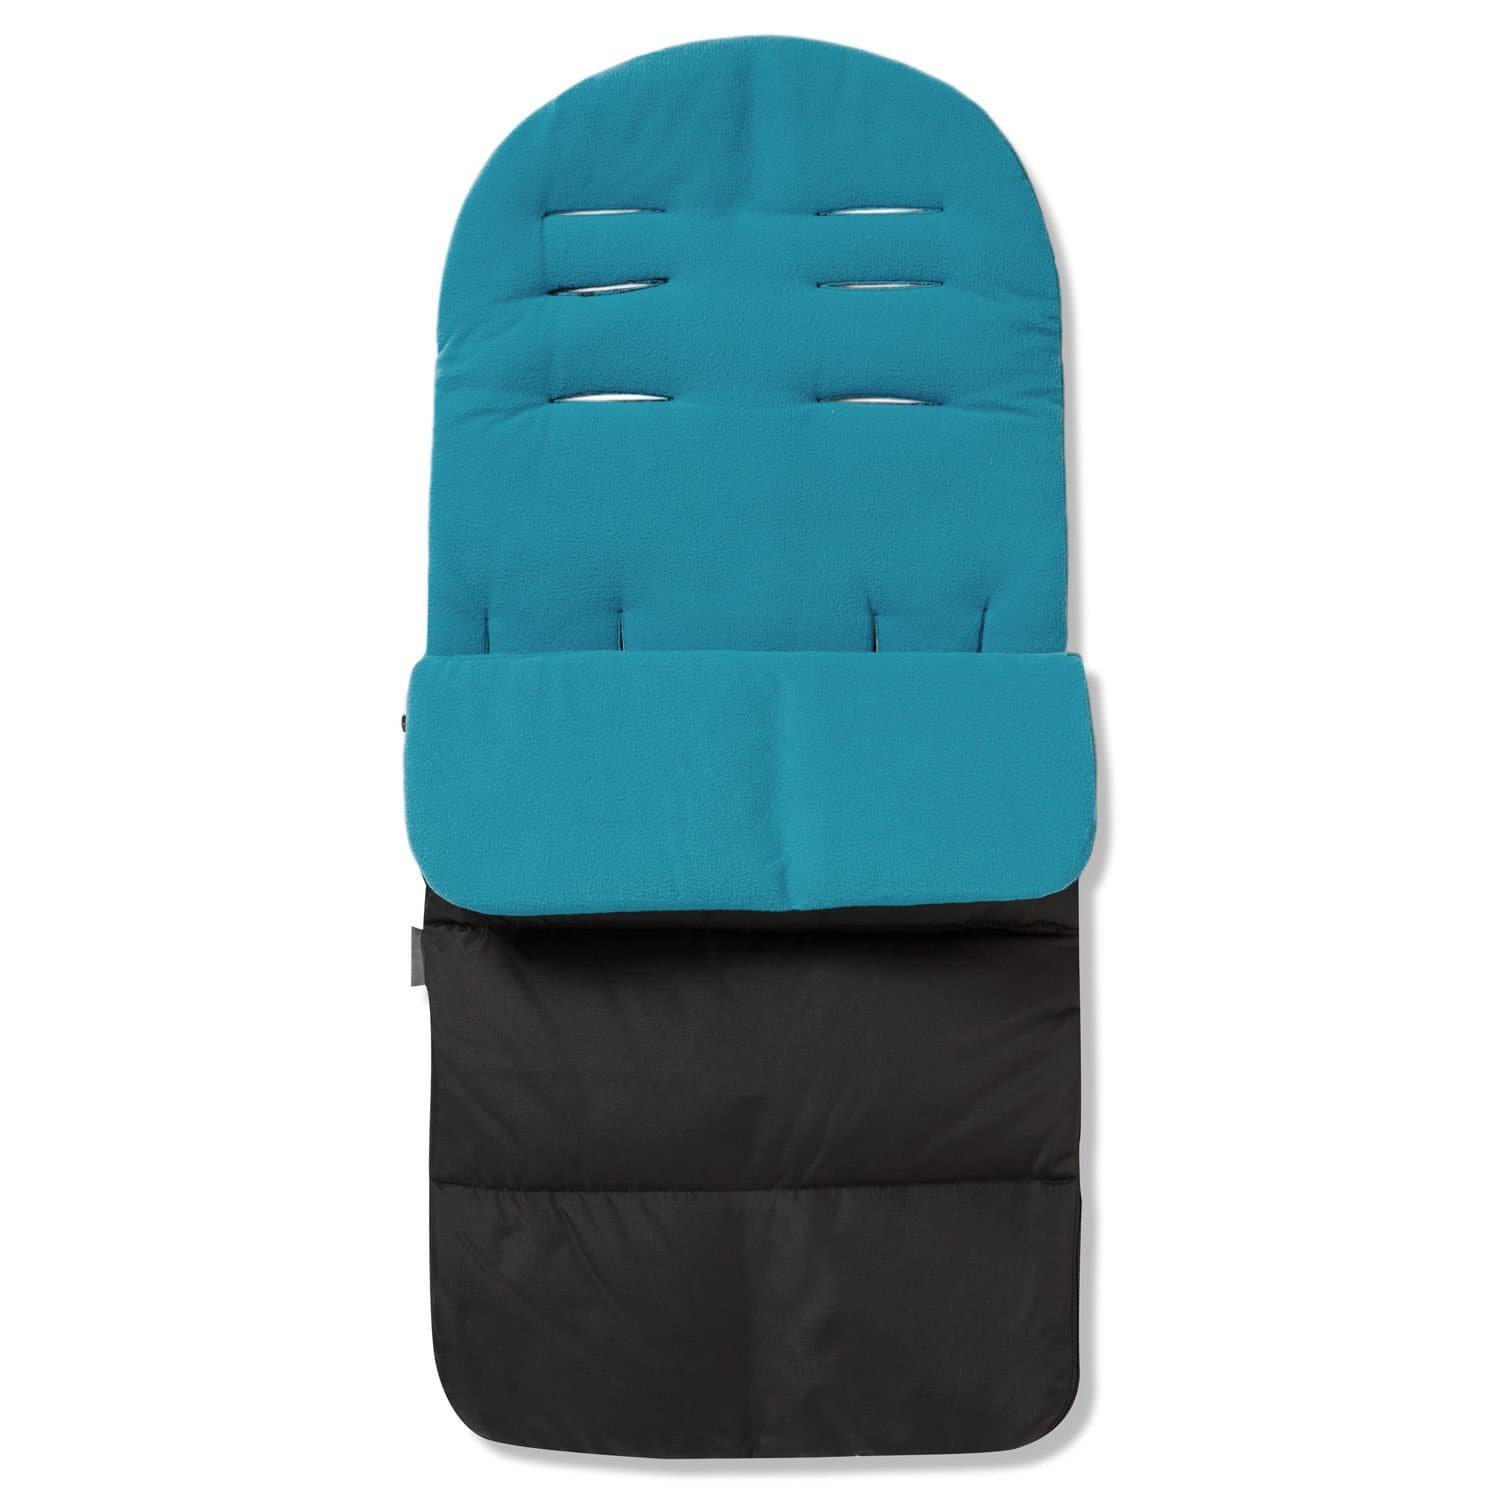 Premium Footmuff / Cosy Toes Compatible with Inglesina - Ocean Blue / Fits All Models | For Your Little One